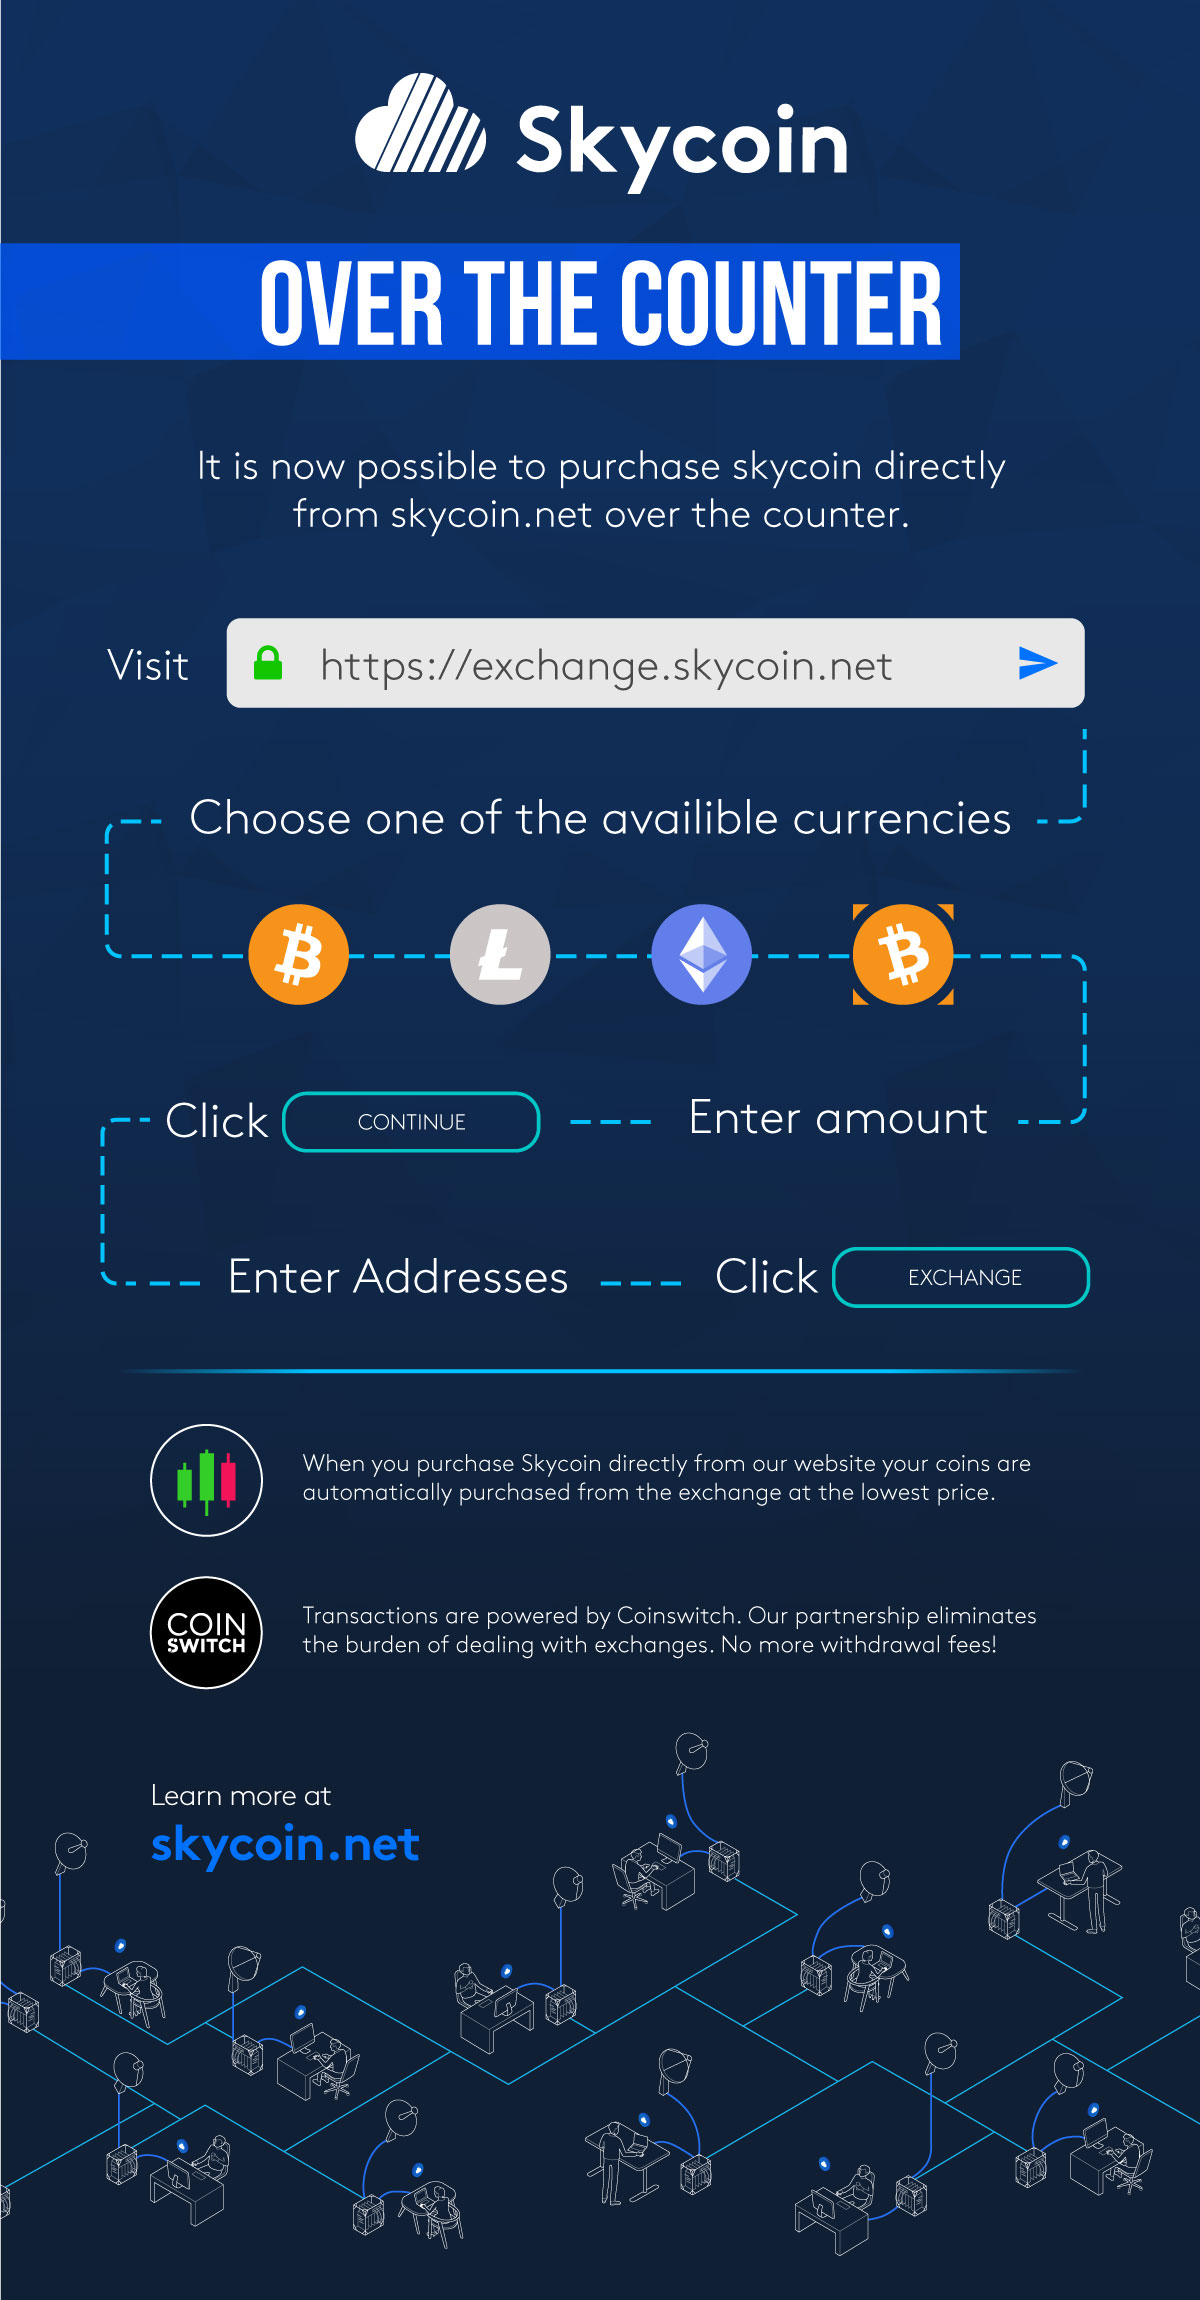 Buy Skycoin Over The Counter [INFOGRAPHIC] | Blog